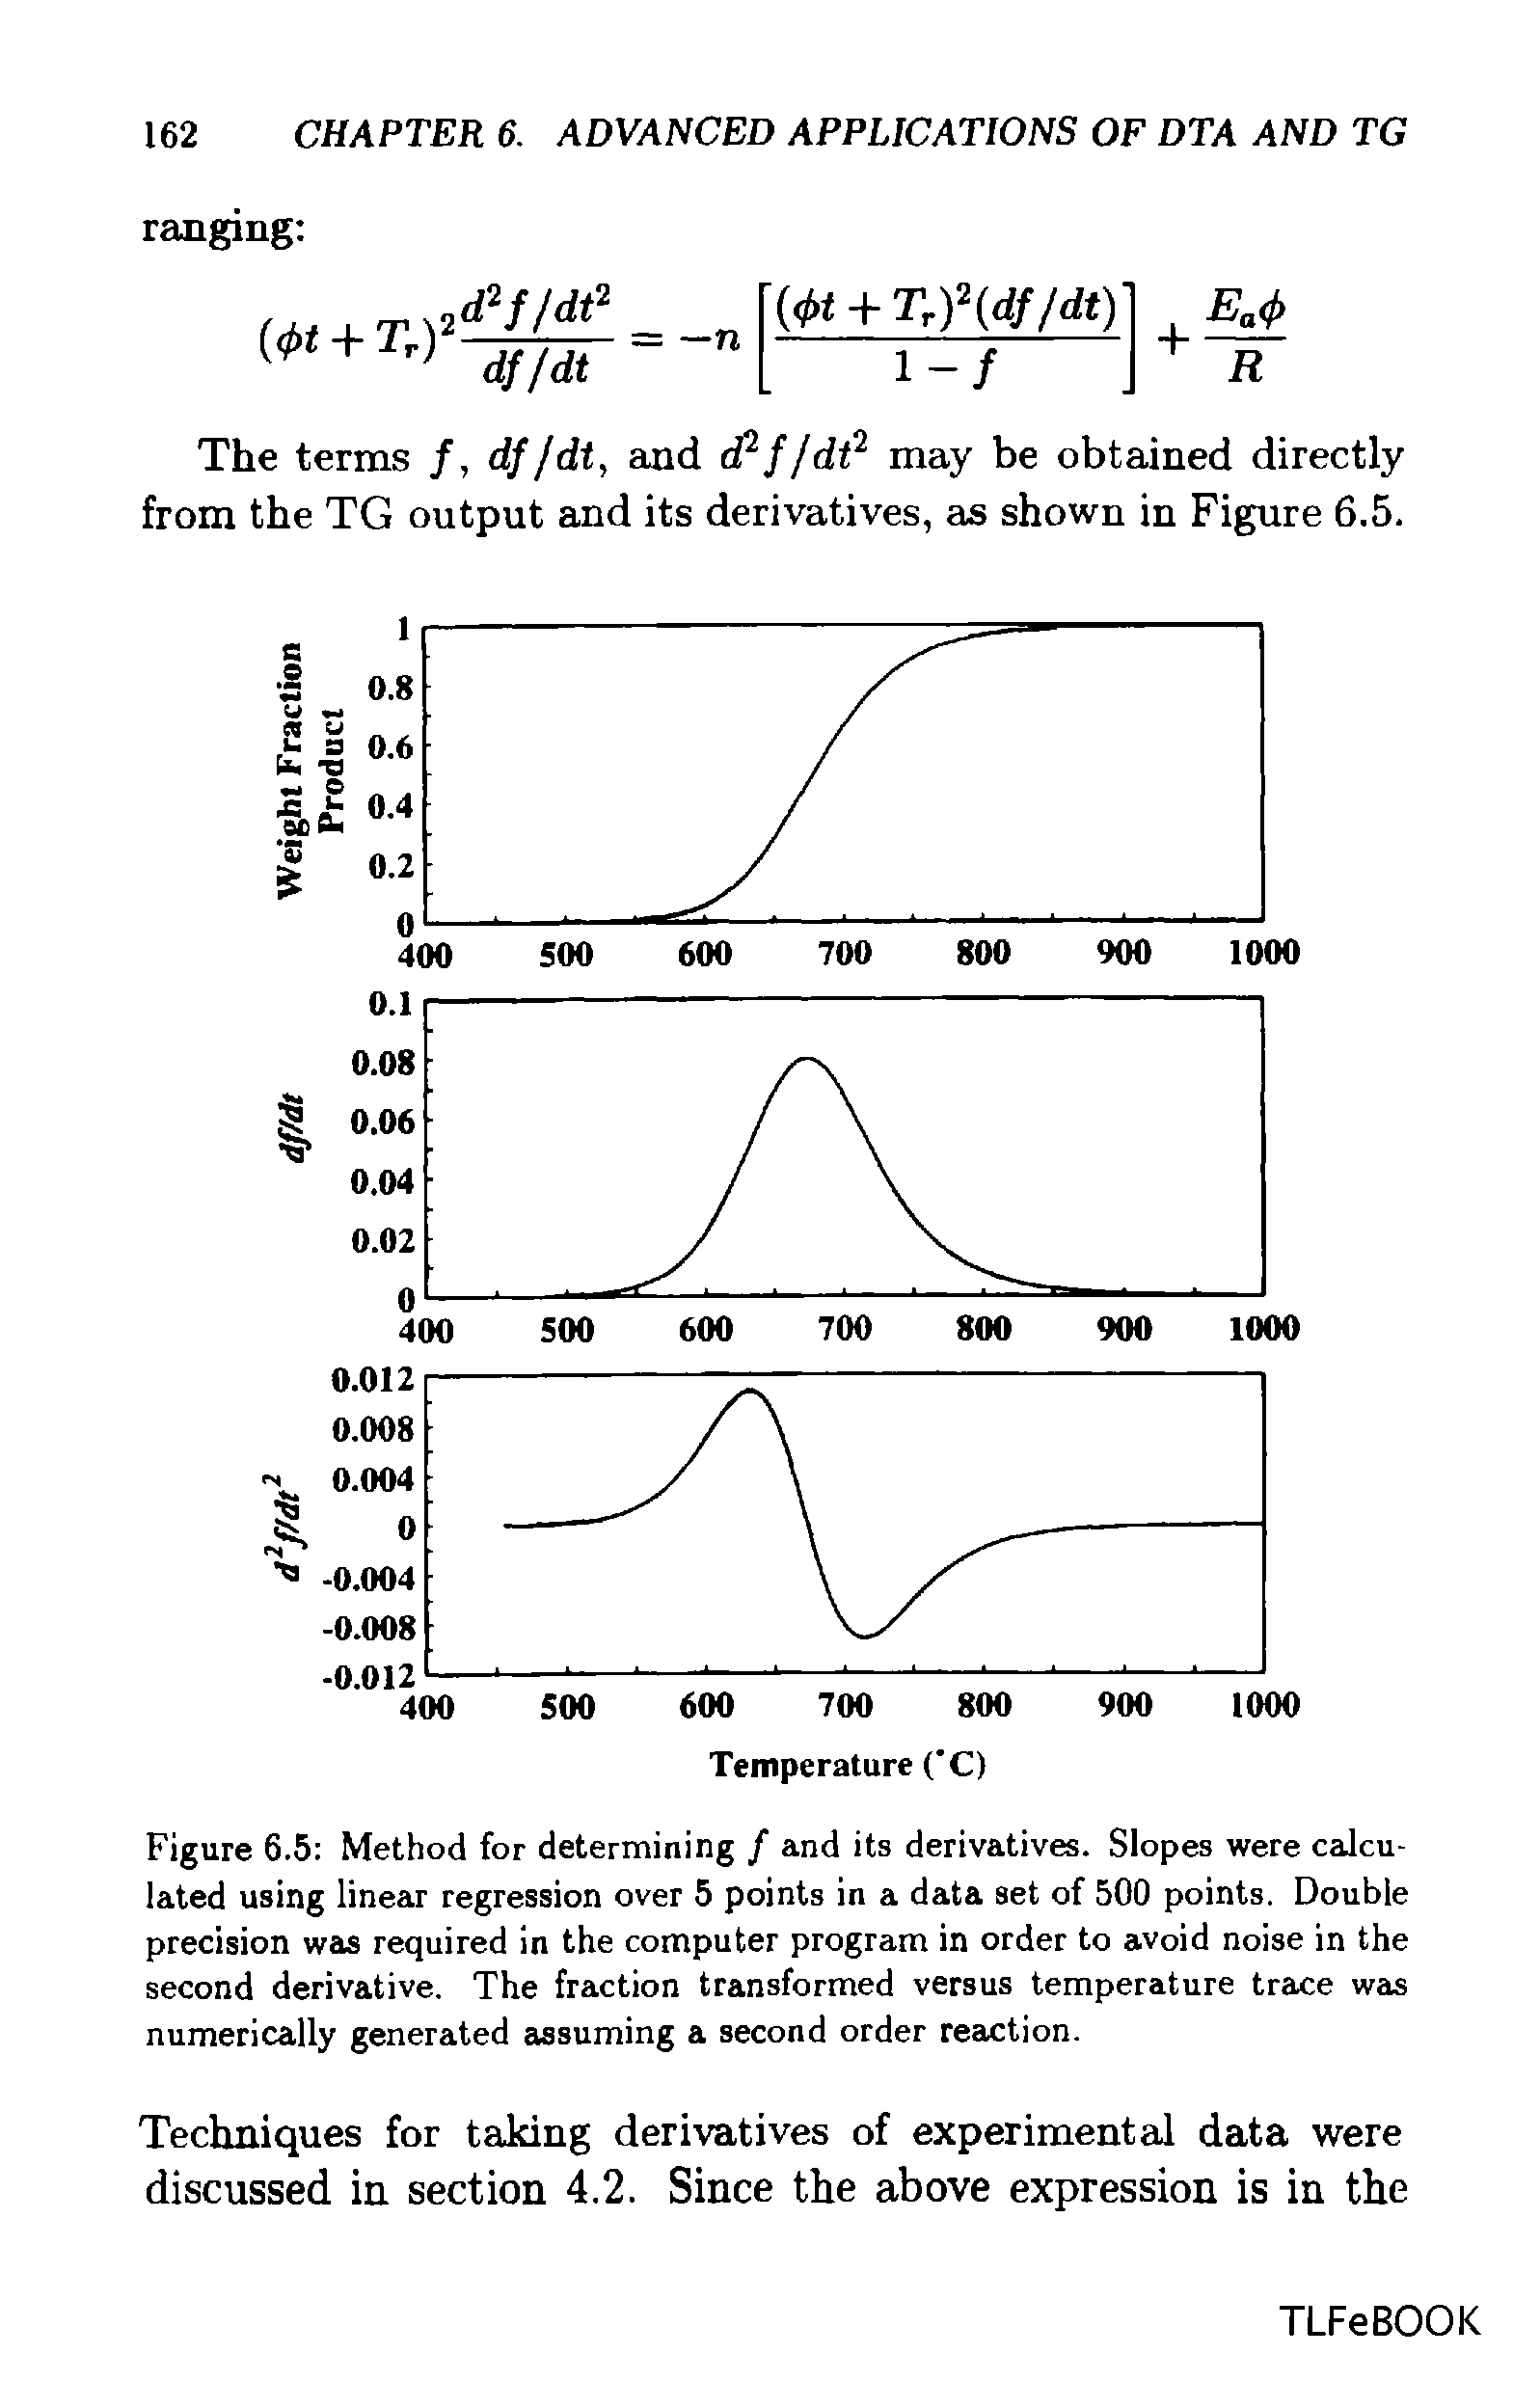 Figure 6.5 Method for determining / and its derivatives. Slopes were calculated using linear regression over 5 points in a data set of 500 points. Double precision was required in the computer program in order to avoid noise in the second derivative. The fraction transformed versus temperature trace was numerically generated assuming a second order reaction.